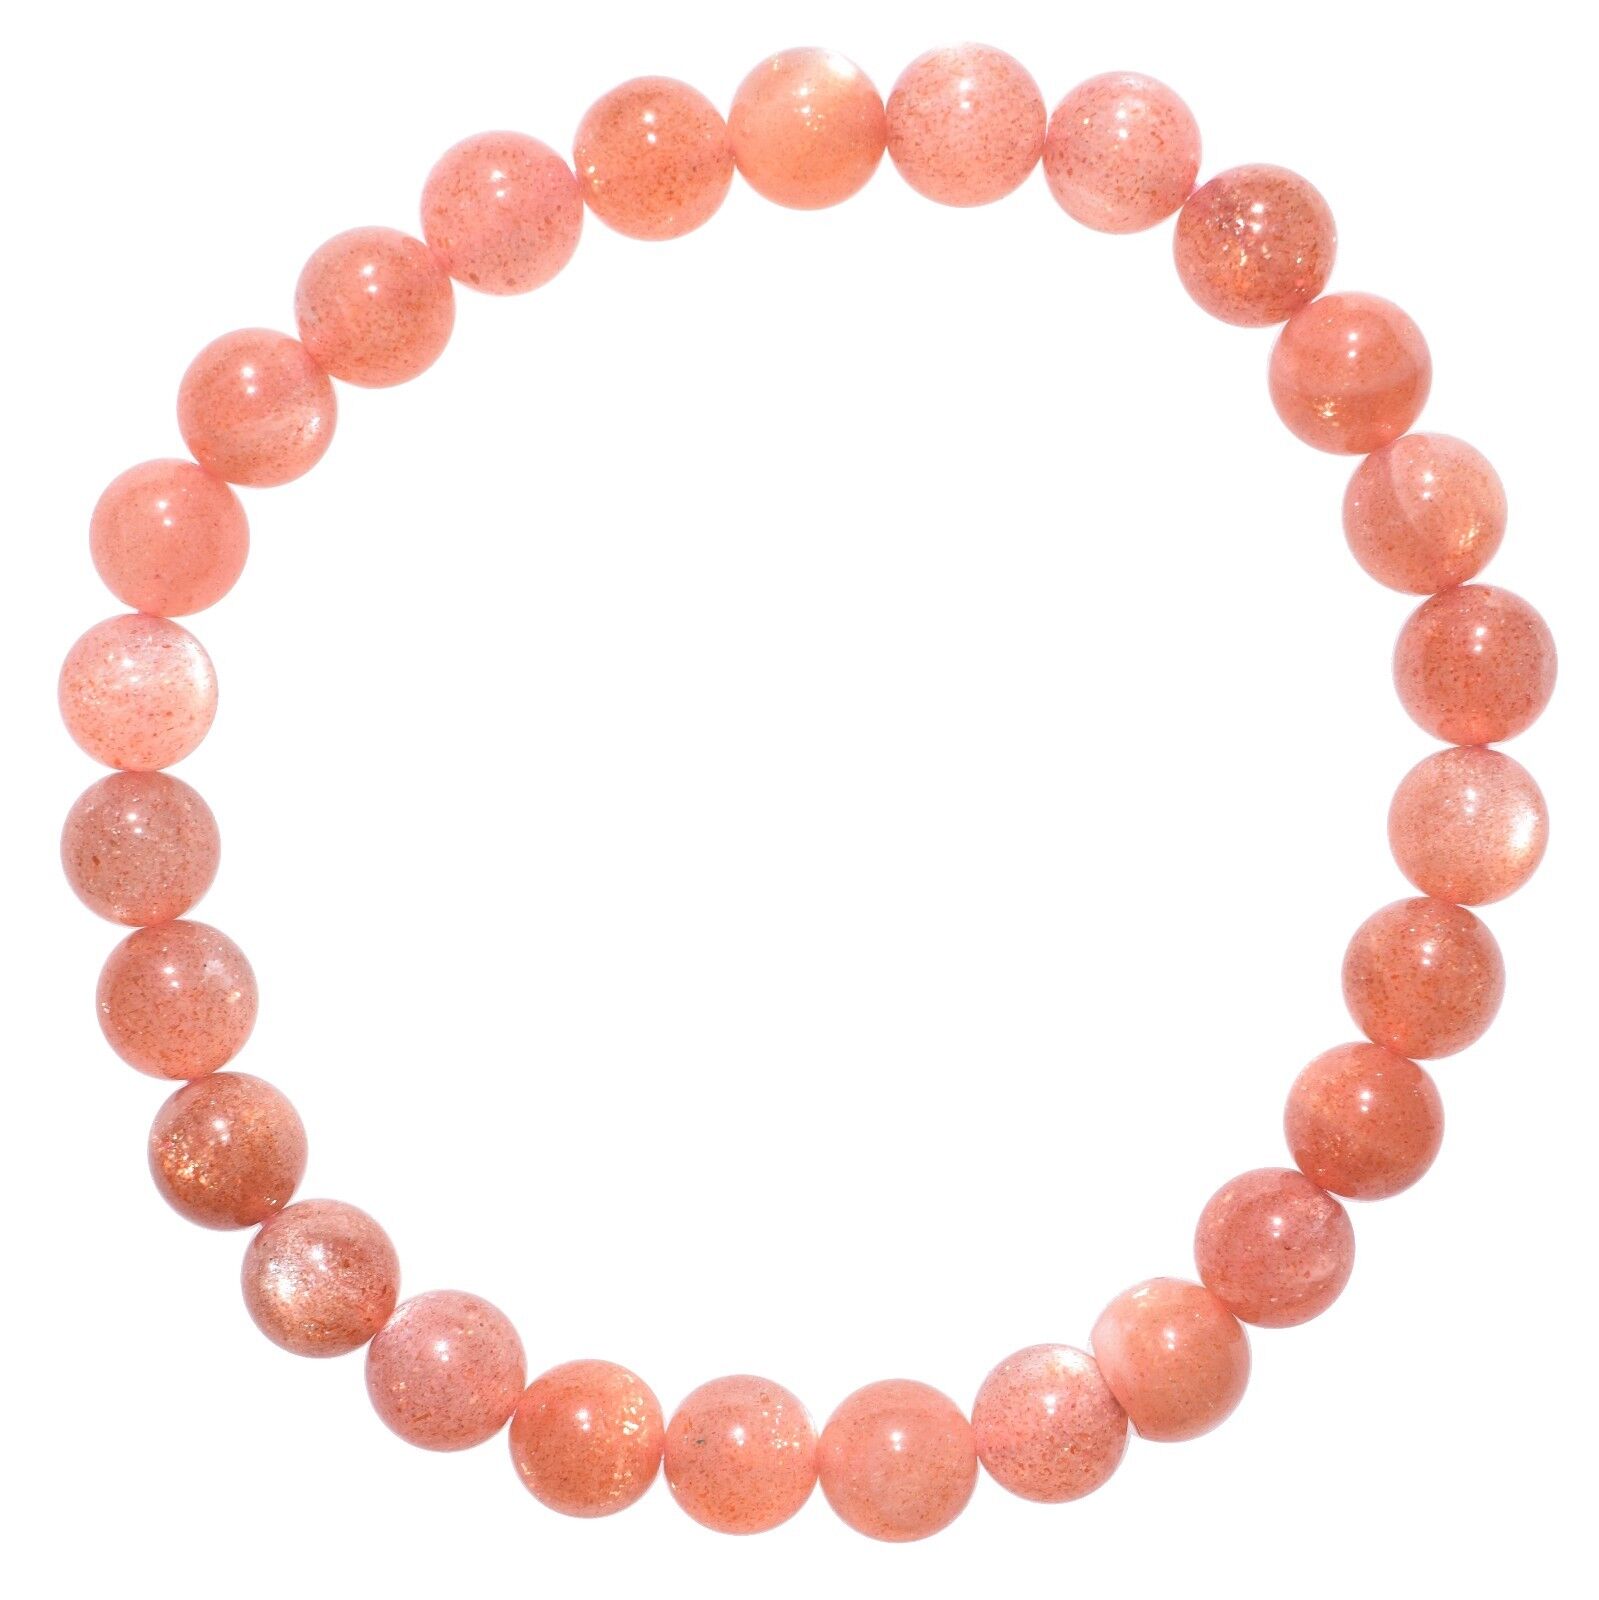 CHARGED Natural Peach Moonstone 5mm-6mm Bead Stretchy Bracelet + Selenite Heart